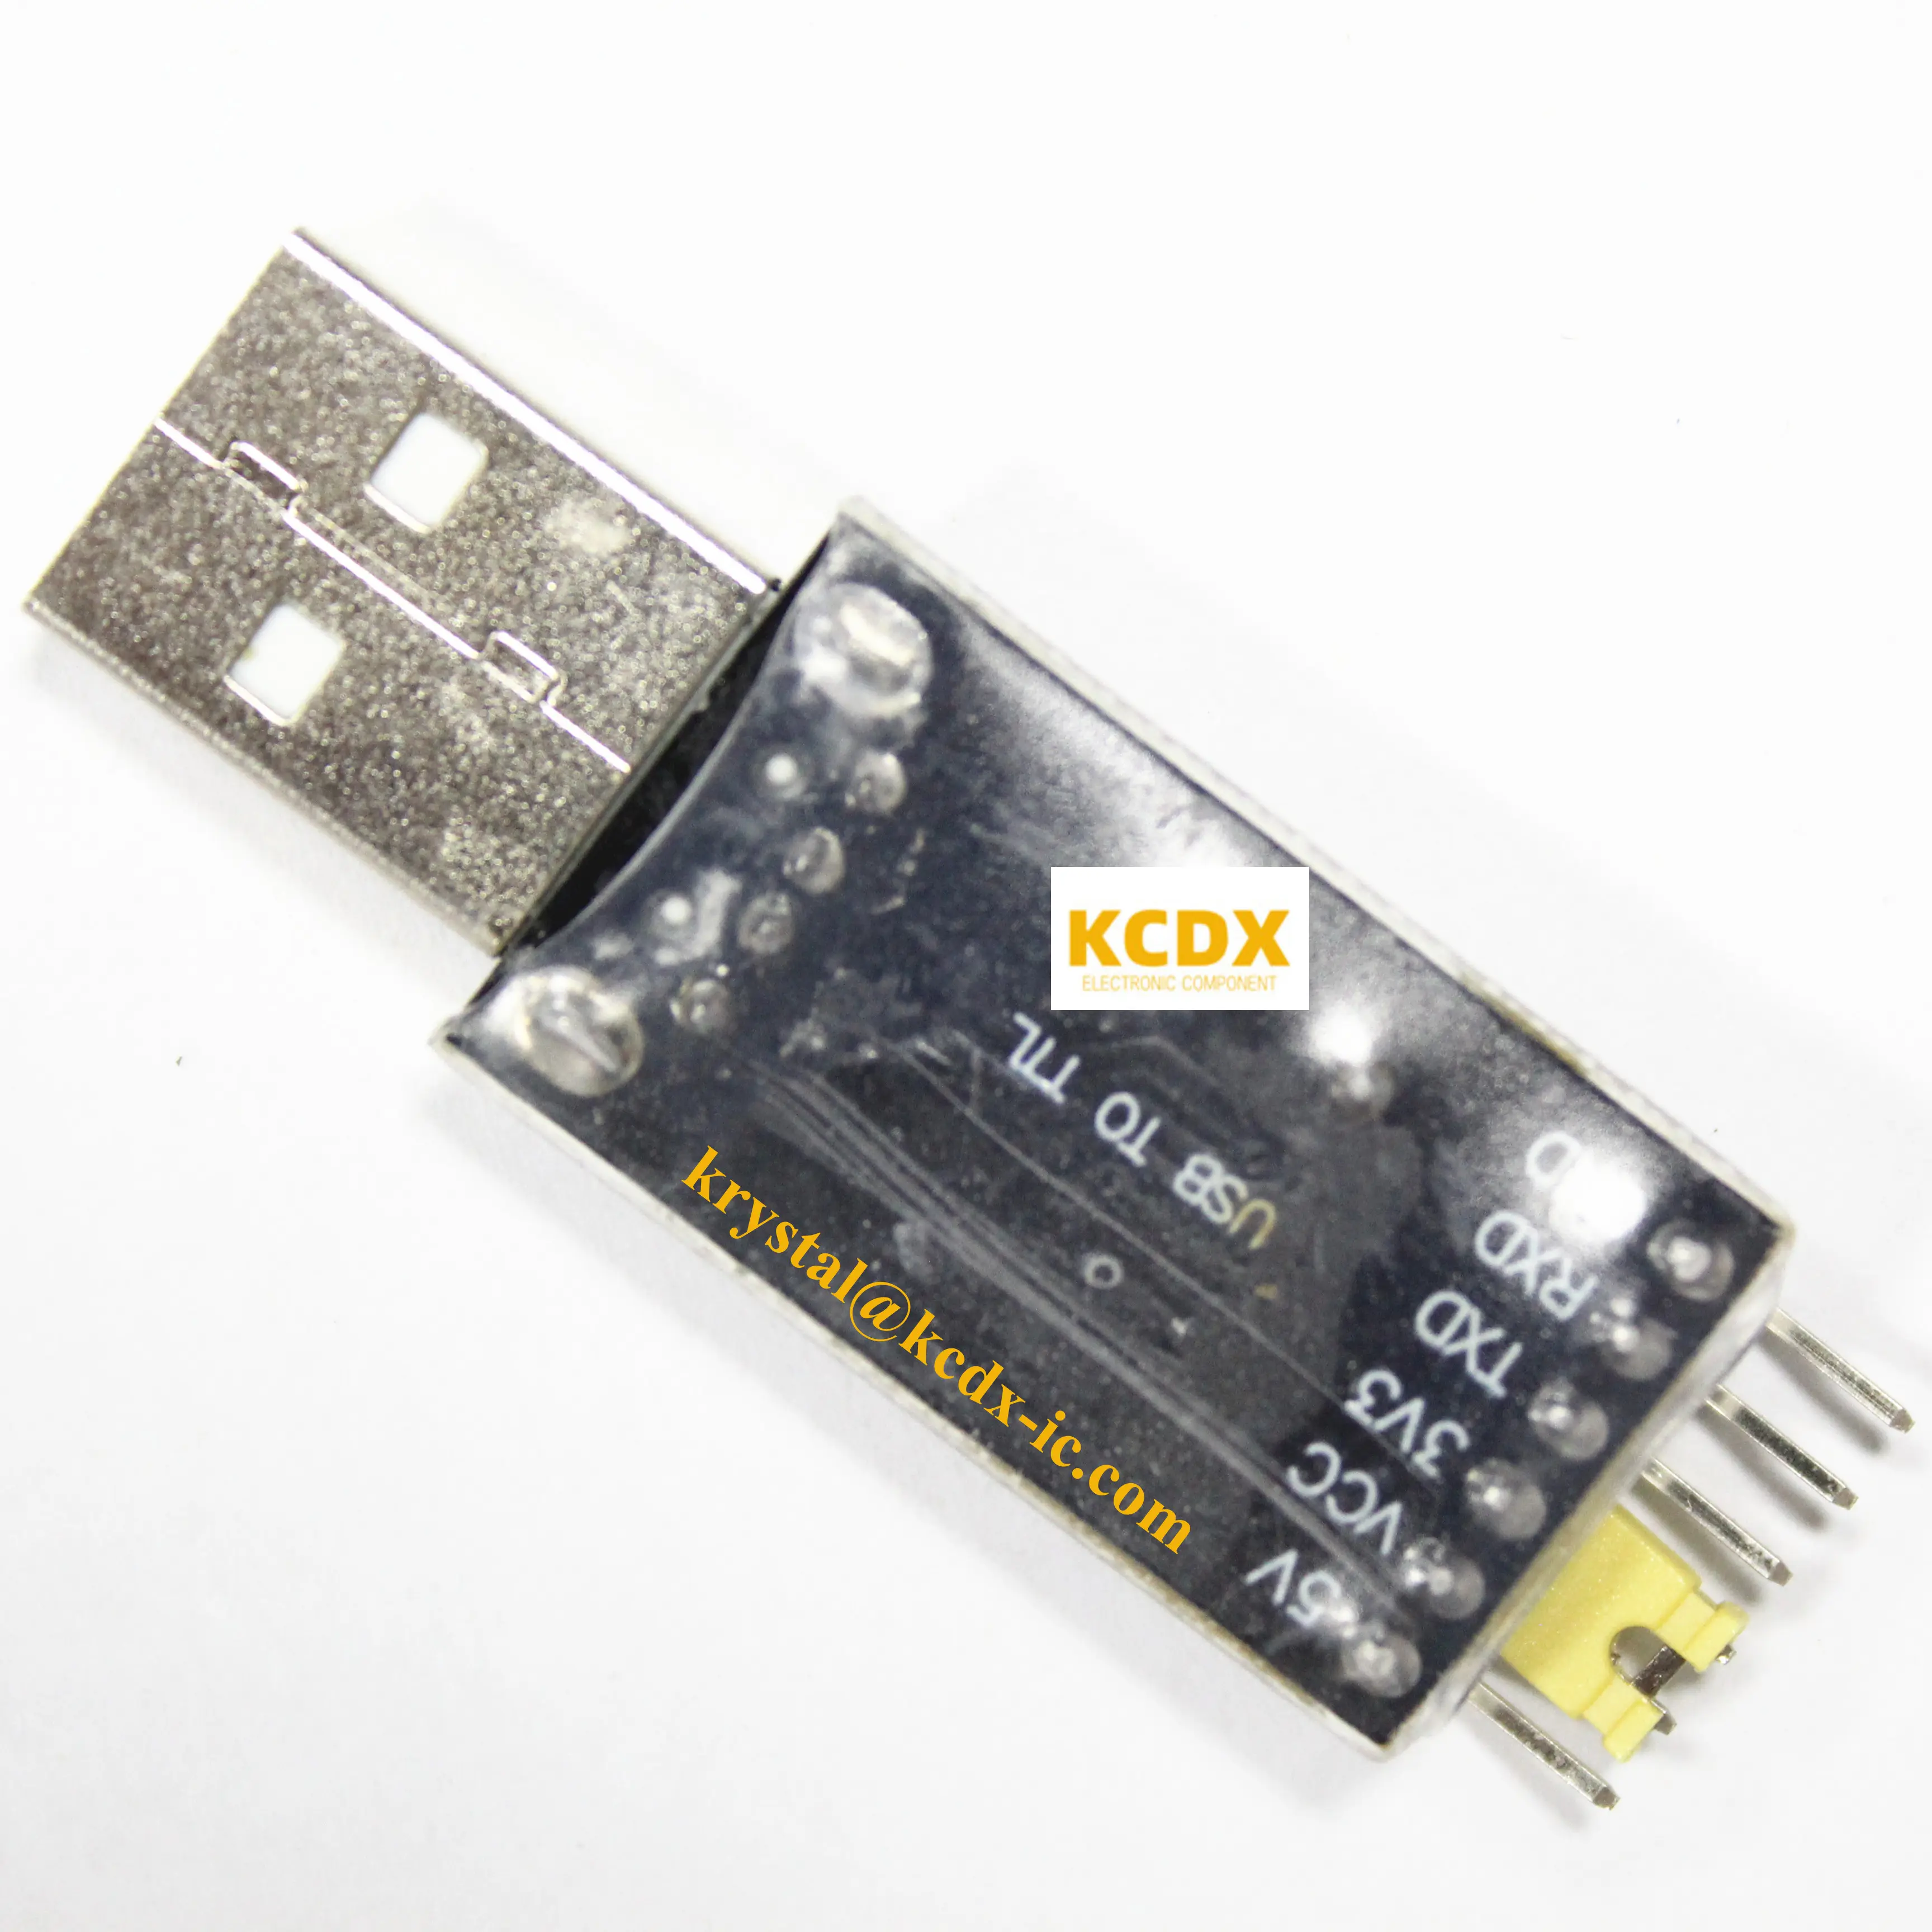 IC New 3.3V 5V CH340G brush board module USB to TTL STC microcontroller download cable SALE